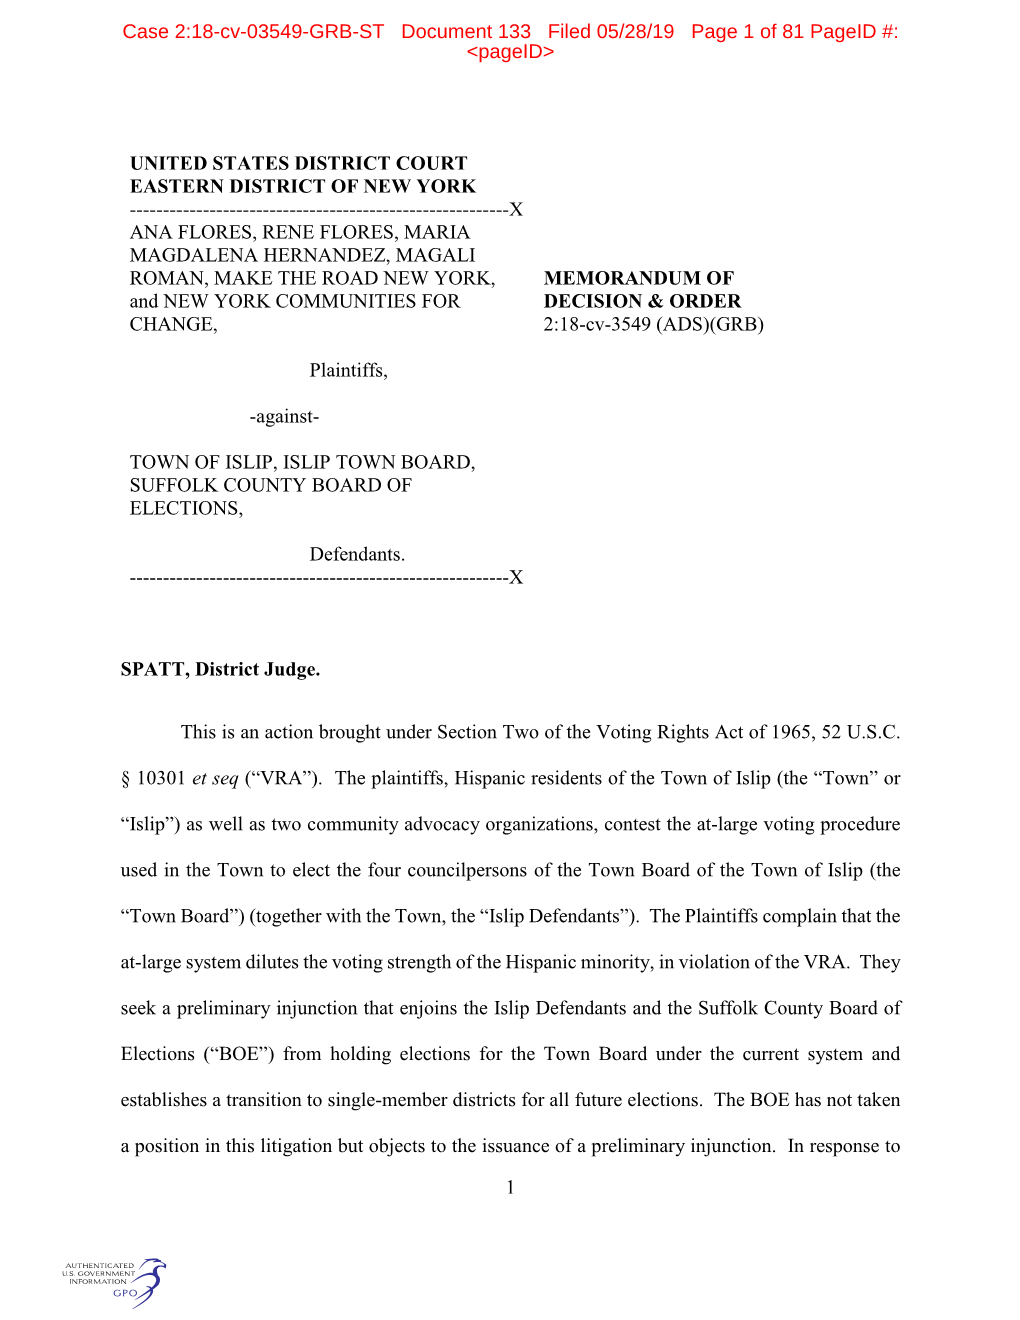 Case 2:18-Cv-03549-GRB-ST Document 133 Filed 05/28/19 Page